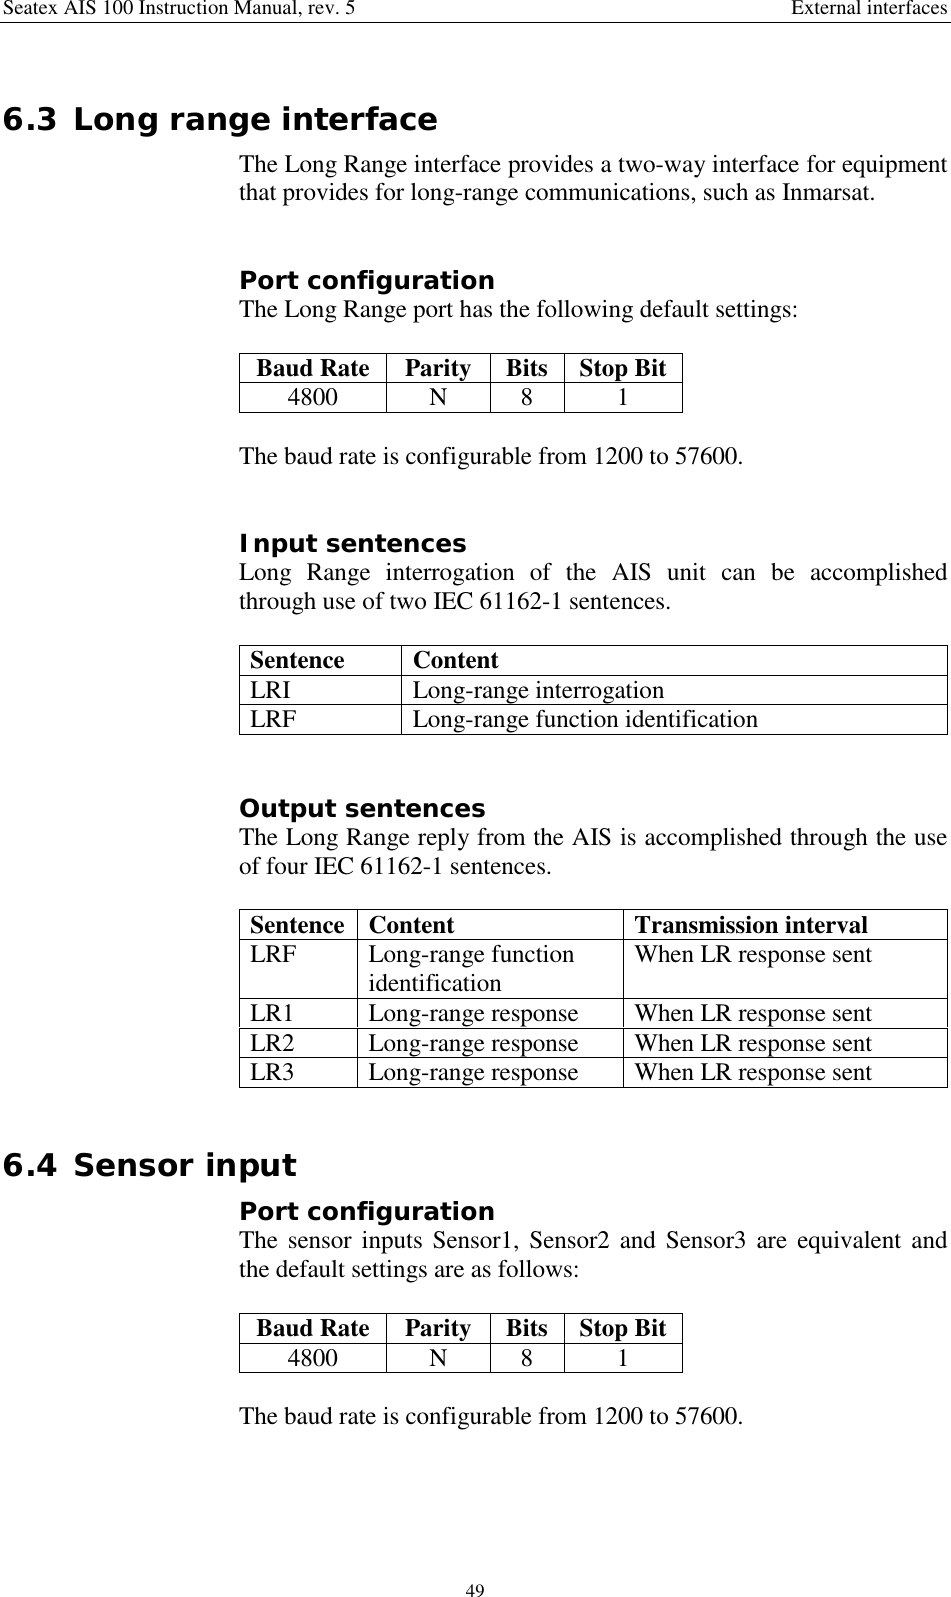 Seatex AIS 100 Instruction Manual, rev. 5 External interfaces496.3 Long range interfaceThe Long Range interface provides a two-way interface for equipmentthat provides for long-range communications, such as Inmarsat.Port configurationThe Long Range port has the following default settings:Baud Rate Parity Bits Stop Bit4800 N 8 1The baud rate is configurable from 1200 to 57600.Input sentencesLong Range interrogation of the AIS unit can be accomplishedthrough use of two IEC 61162-1 sentences.Sentence ContentLRI Long-range interrogationLRF Long-range function identificationOutput sentencesThe Long Range reply from the AIS is accomplished through the useof four IEC 61162-1 sentences.Sentence Content Transmission intervalLRF Long-range functionidentification When LR response sentLR1 Long-range response When LR response sentLR2 Long-range response When LR response sentLR3 Long-range response When LR response sent6.4 Sensor inputPort configurationThe sensor inputs Sensor1, Sensor2 and Sensor3 are equivalent andthe default settings are as follows:Baud Rate Parity Bits Stop Bit4800 N 8 1The baud rate is configurable from 1200 to 57600.